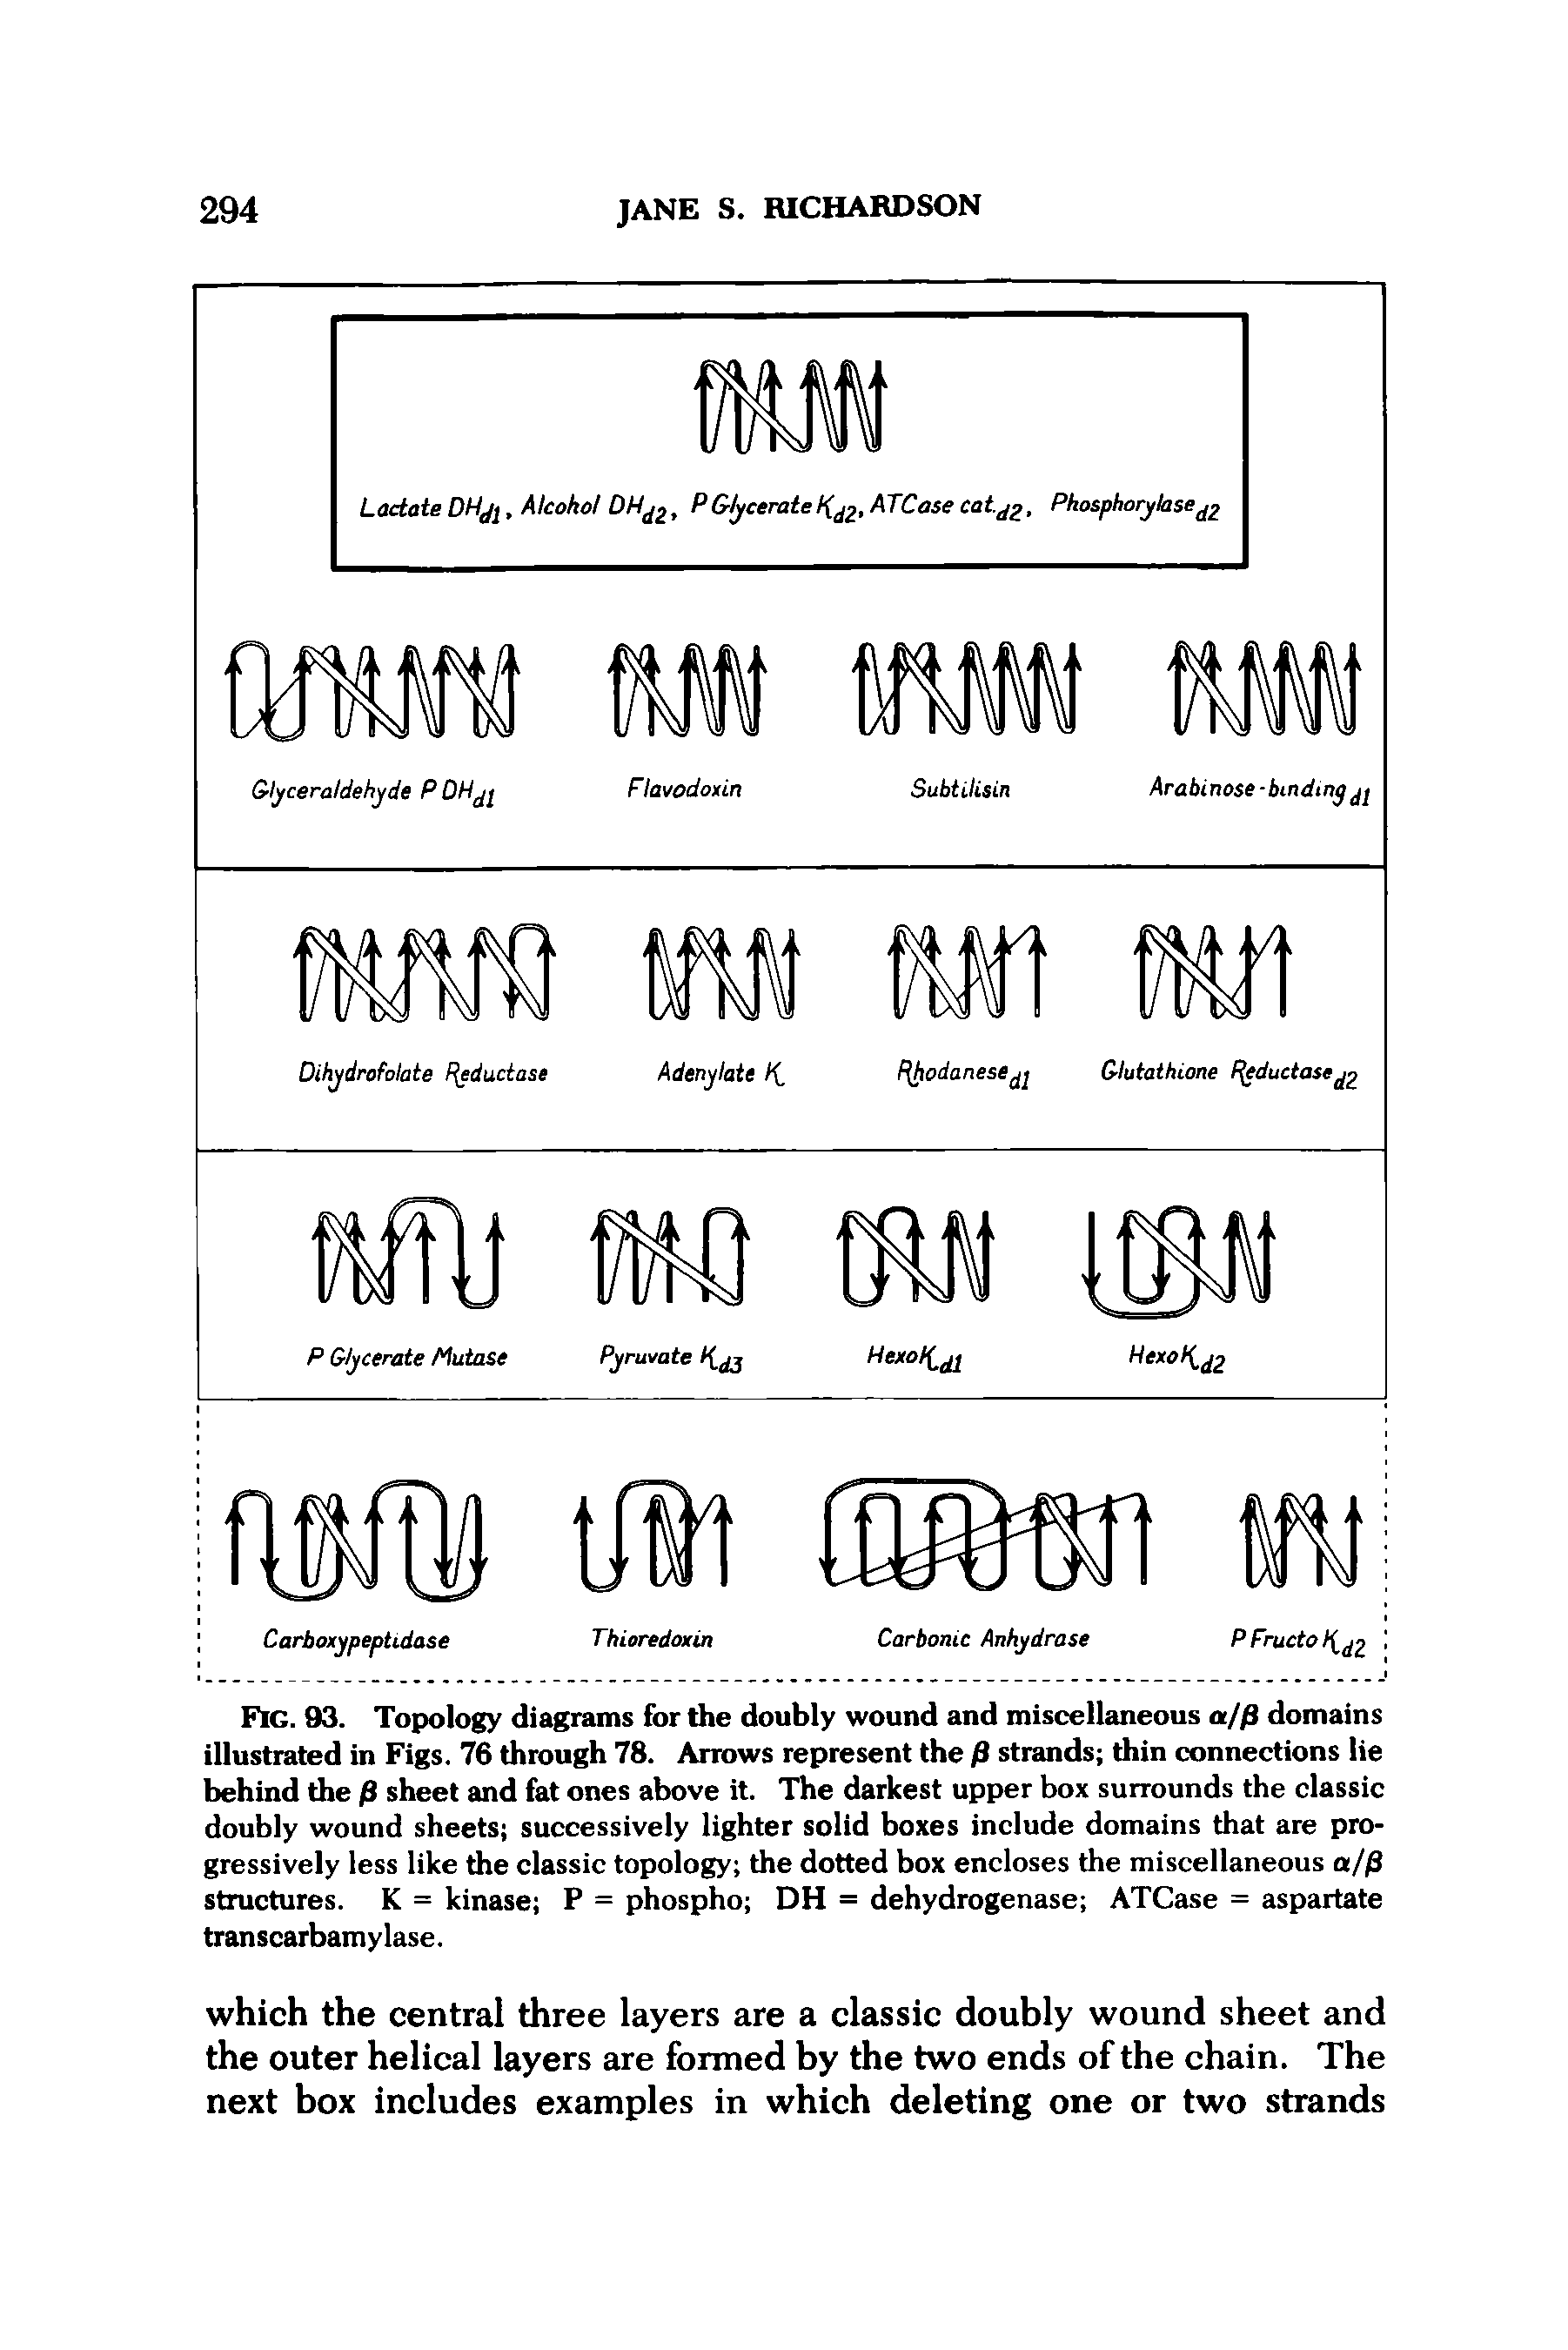 Fig. 93. Topology diagrams for the doubly wound and miscellaneous a/p domains illustrated in Figs. 76 through 78. Arrows represent the P strands thin connections lie behind the p sheet and fat ones above it. The darkest upper box surrounds the classic doubly wound sheets successively lighter solid boxes include domains that are progressively less like the classic topology the dotted box encloses the miscellaneous a/P structures. K = kinase P = phospho DH = dehydrogenase ATCase = aspartate transcarbamylase.